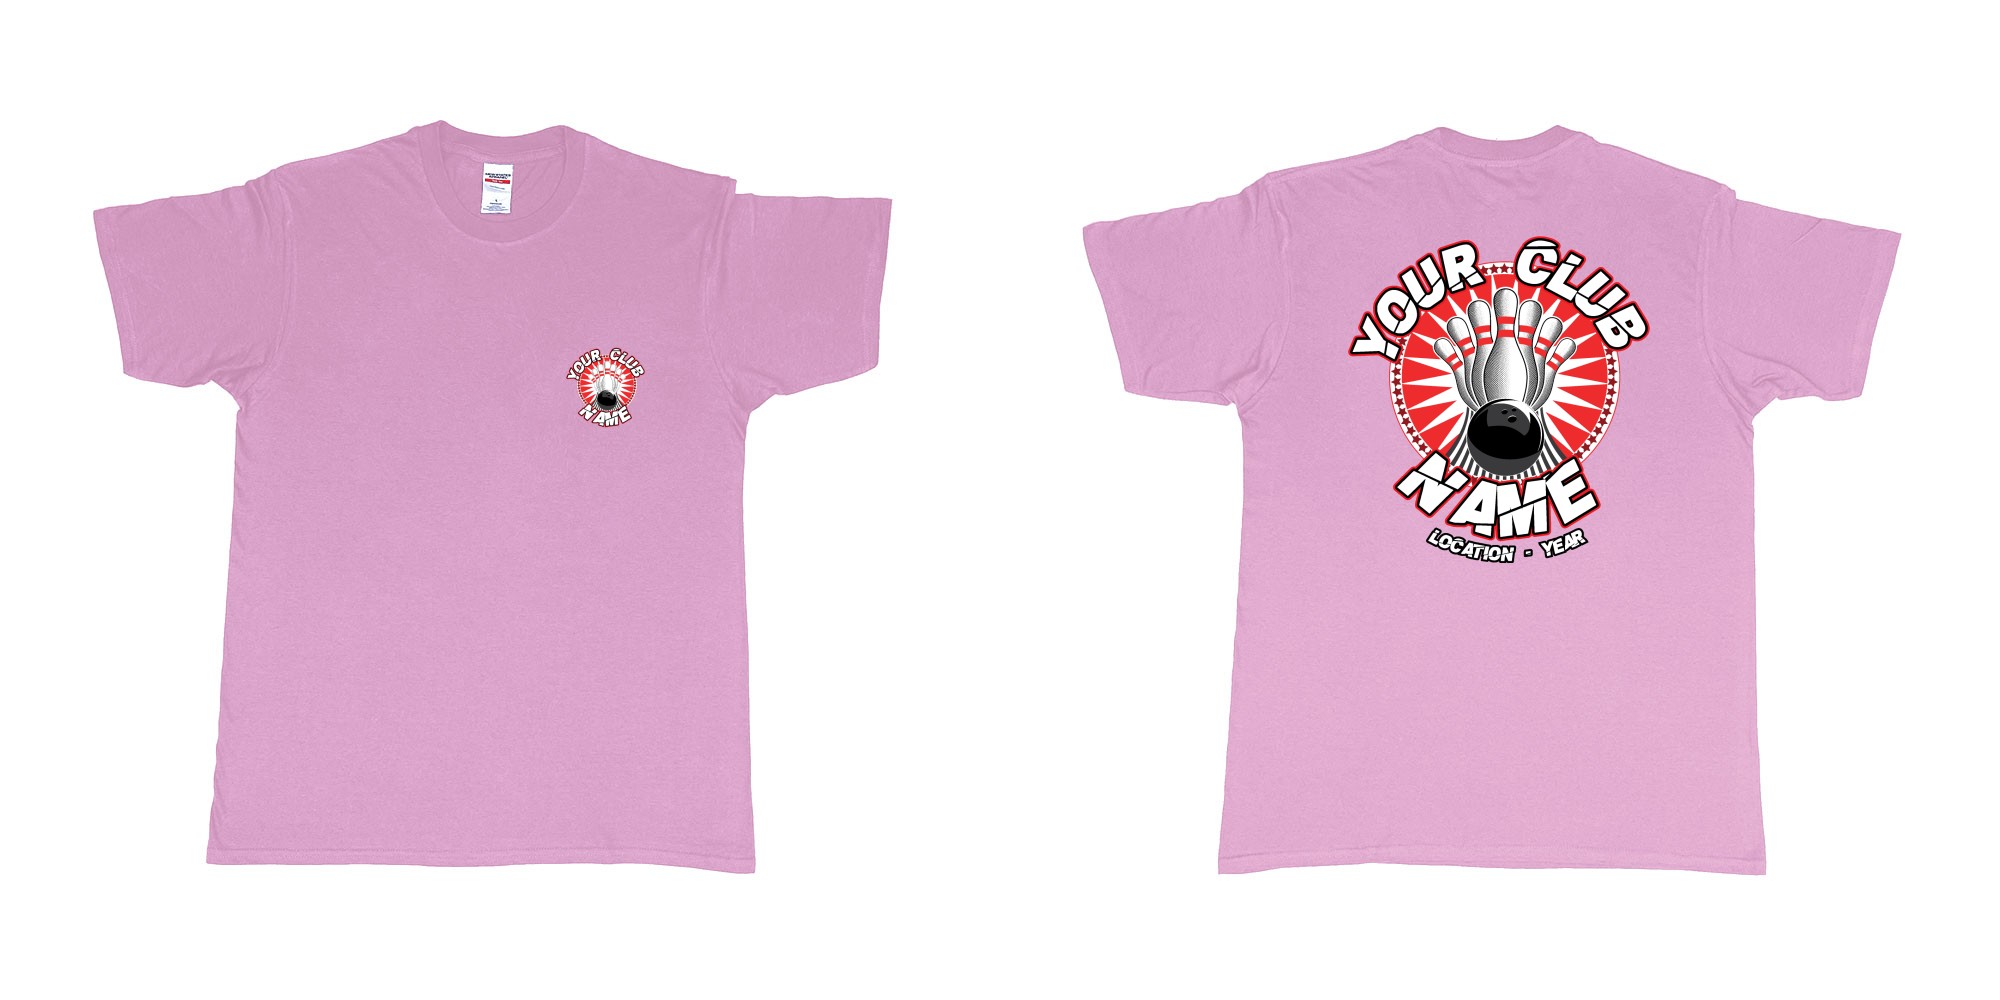 Custom tshirt design TPW strike bowling in fabric color light-pink choice your own text made in Bali by The Pirate Way